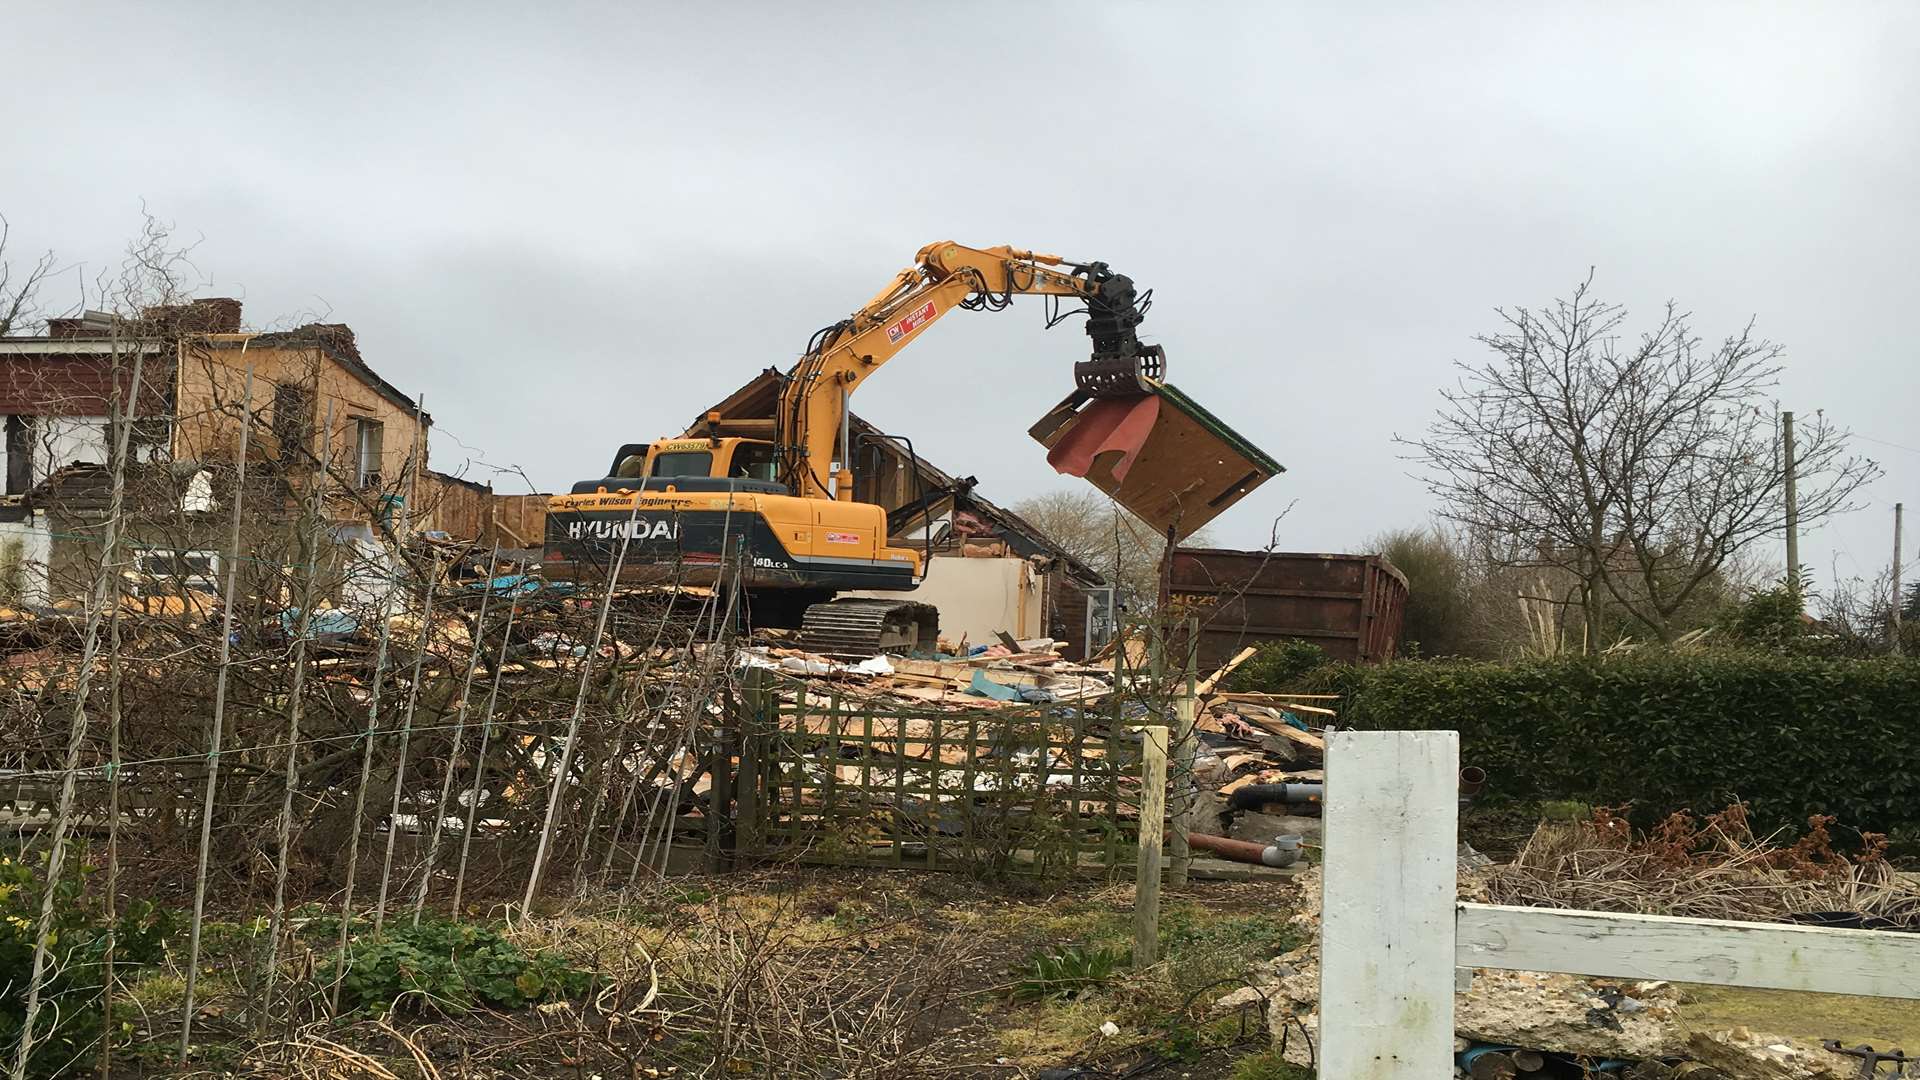 The house being demolished